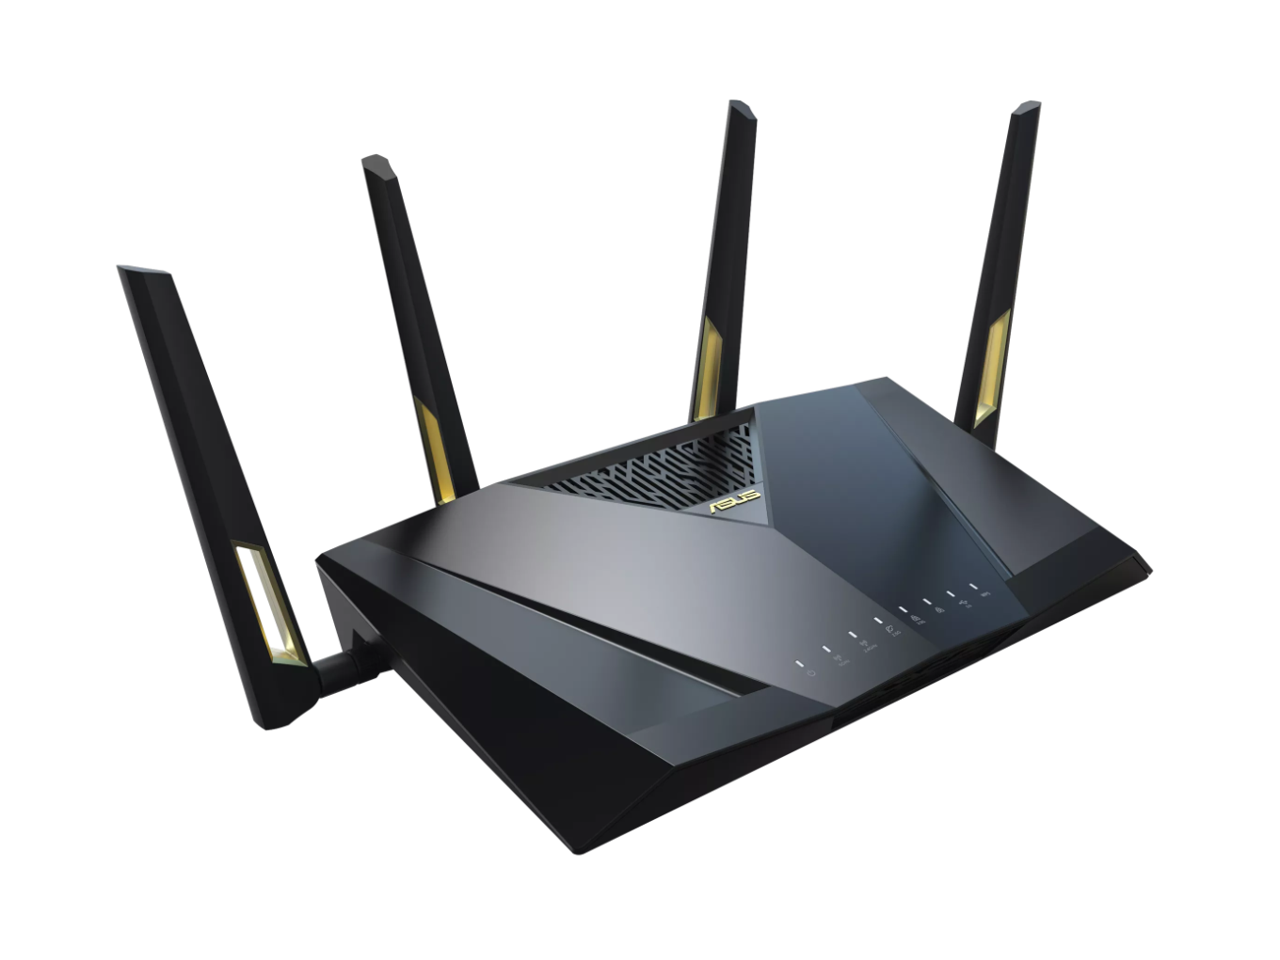 ASUS RT-AX88U PRO AX6000 Dual Band WiFi 6 Router $227